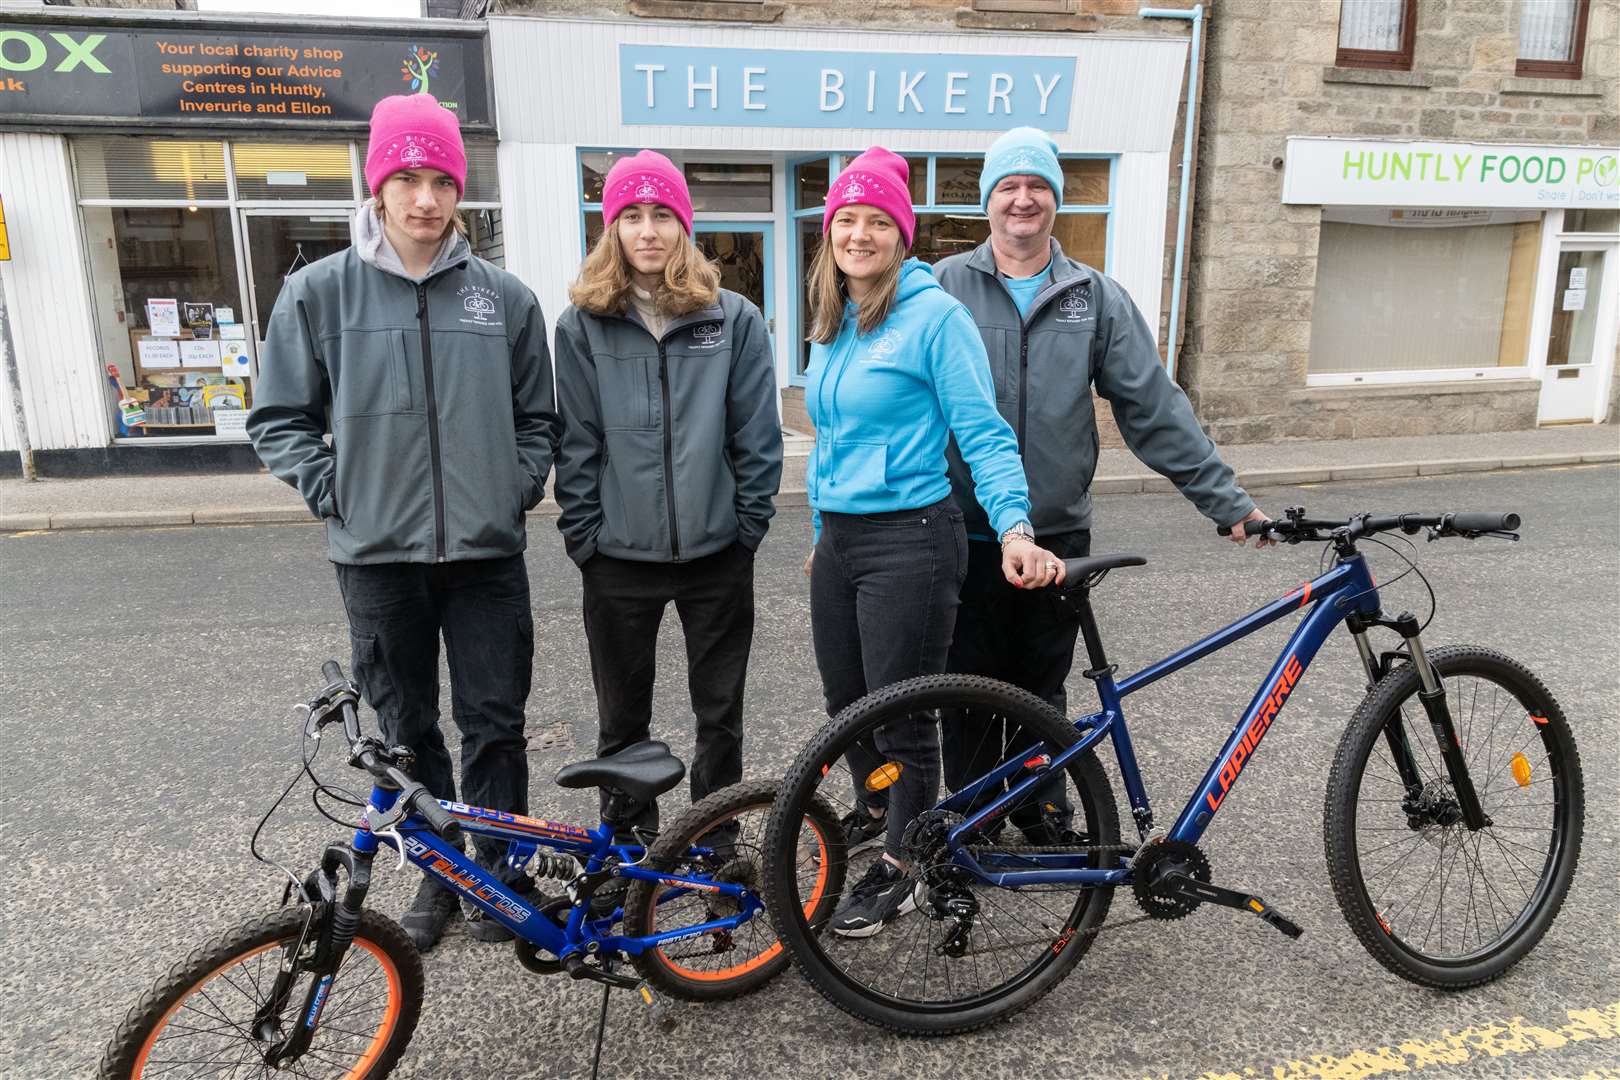 Gordon Rural Action's new Bikery is one service the charity provides which could use volunteer help...Picture: Beth Taylor.